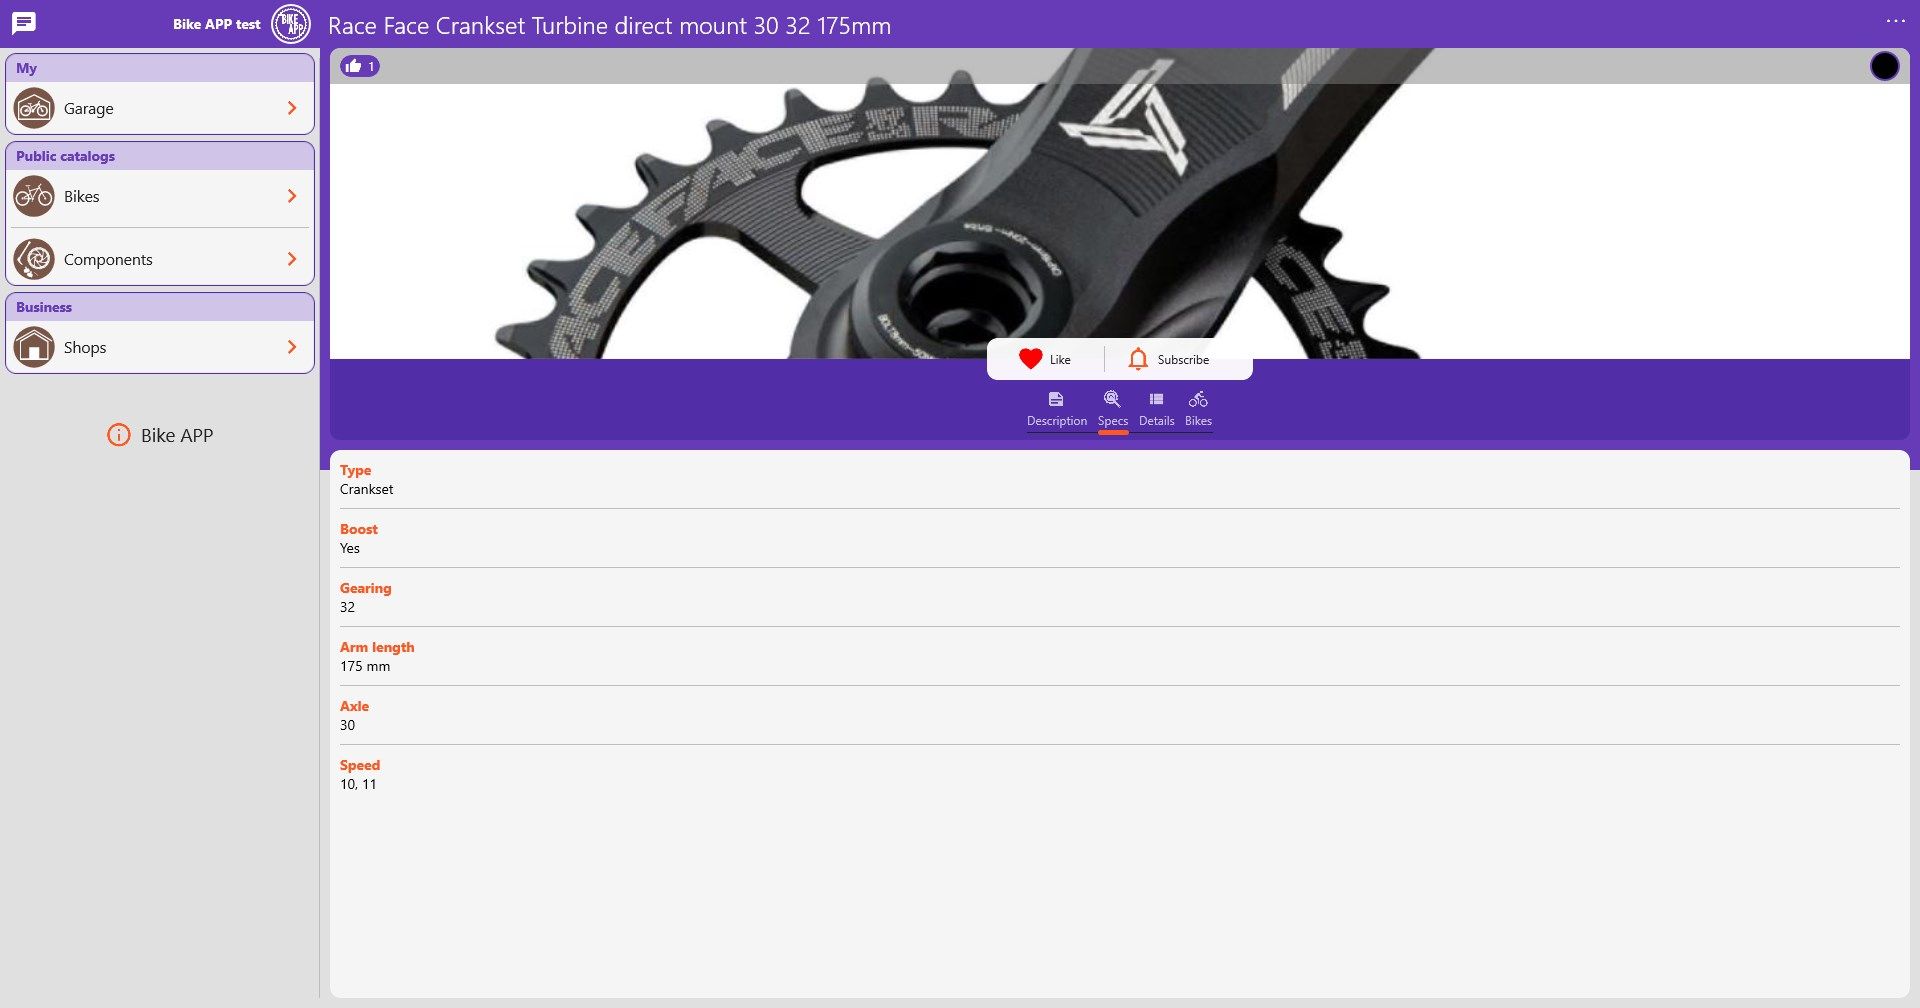 One of the key features of Bike APP is public catalog of bikes and components, including relations between components and bikes. These catalogs are available for every Bike APP user and keep growing all the time when Bike APP users specify bikes and their components to their own bike garages.